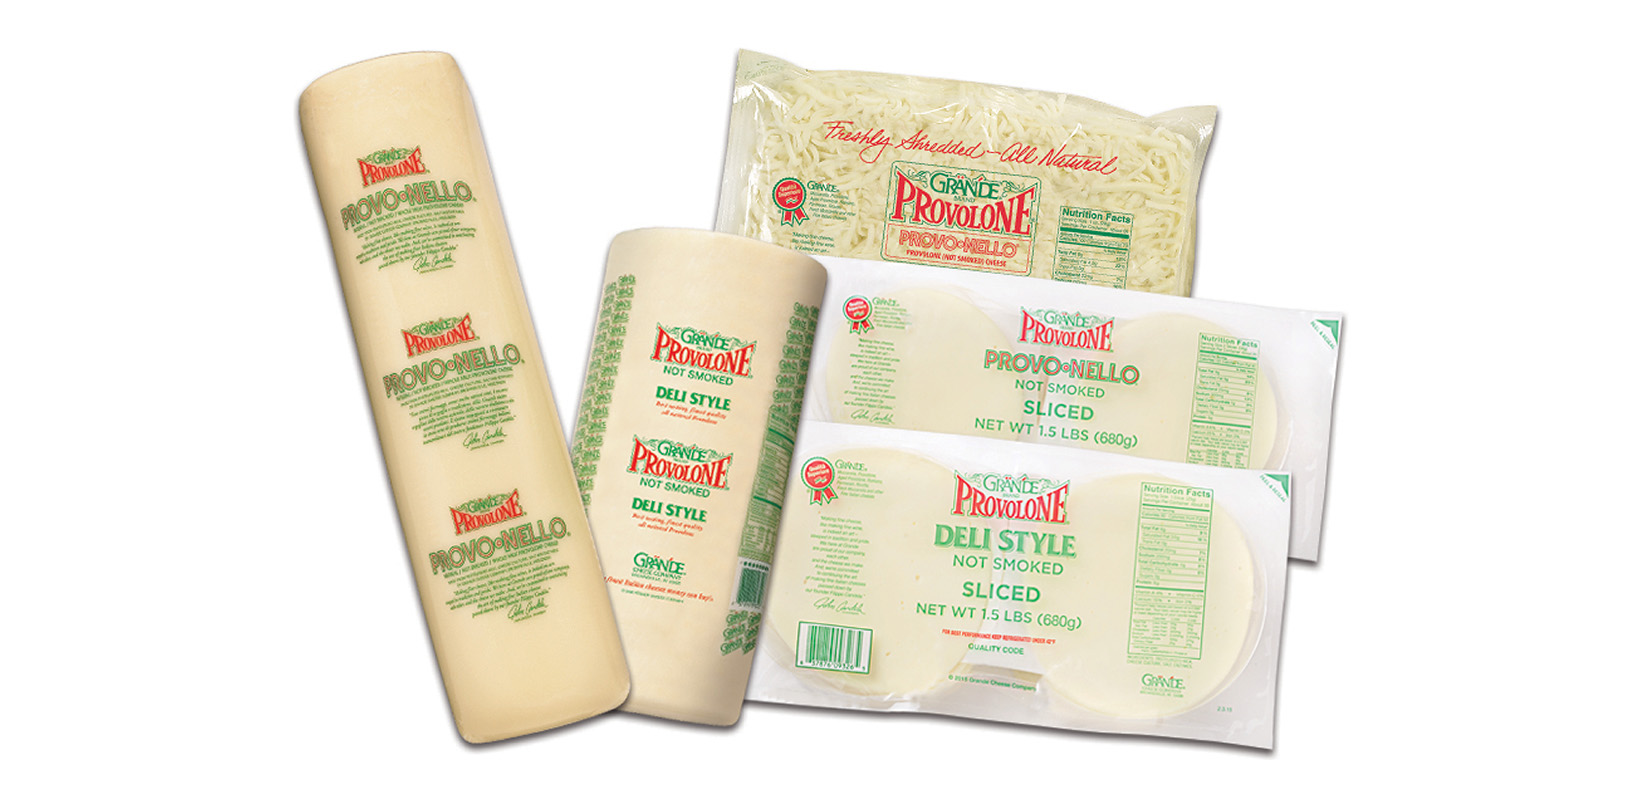 Provolone Cheese Family Image